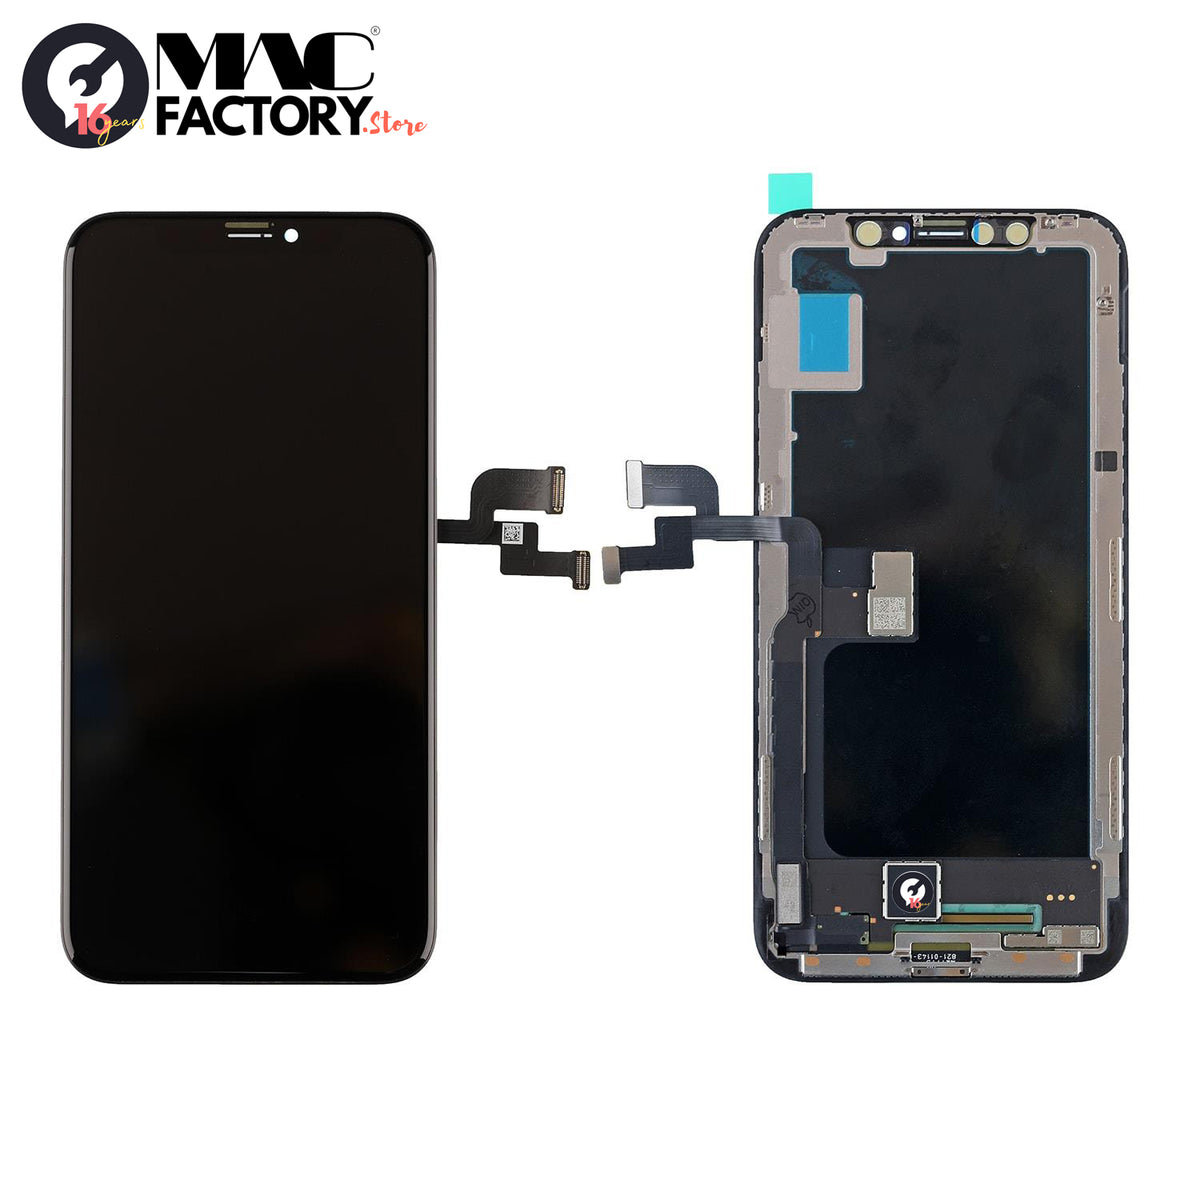 BLACK OLED SCREEN DIGITIZER ASSEMBLY FOR IPHONE X